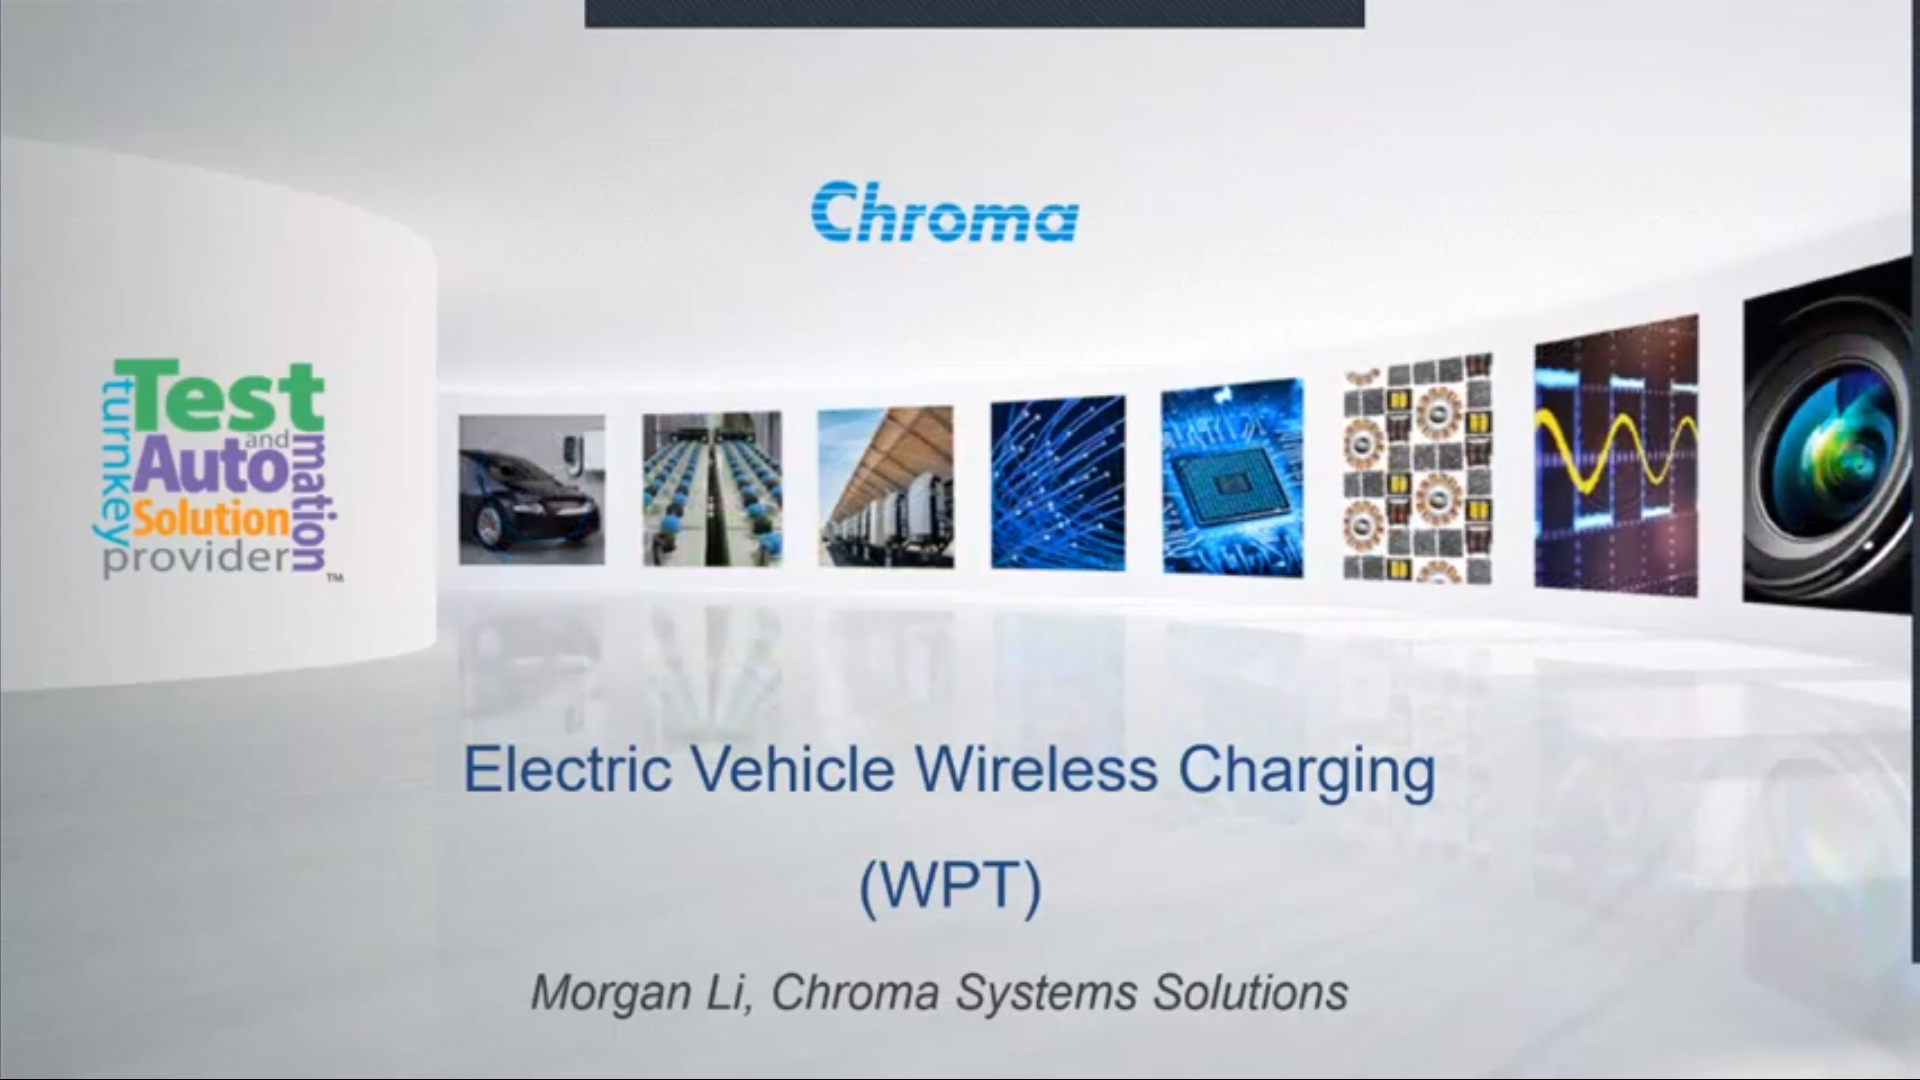 Webinar: An Introduction to WPT (Wireless Power Transfer) and Test Solutions